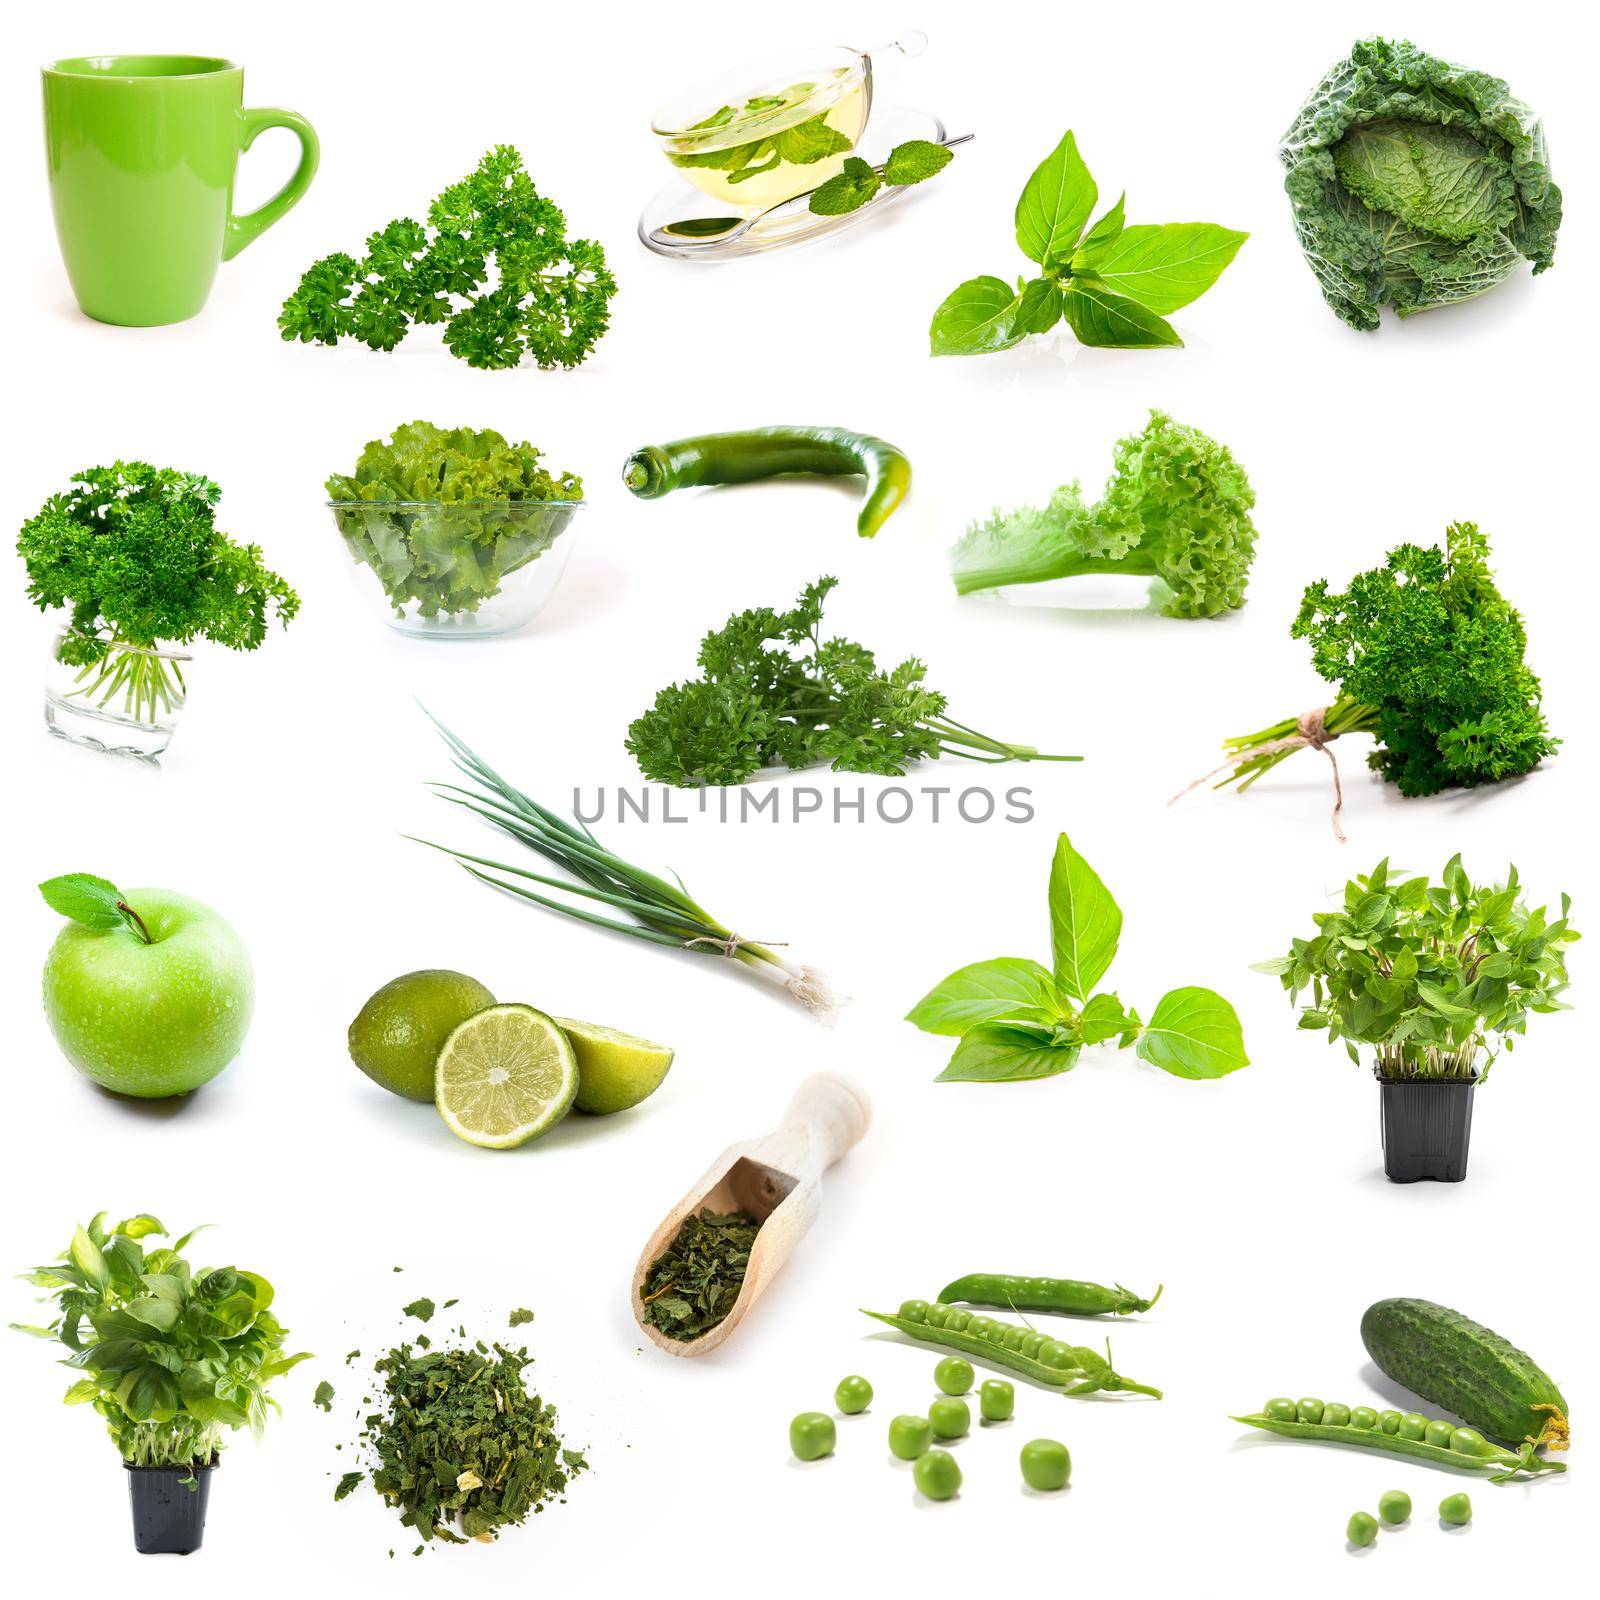 green products collage by tan4ikk1